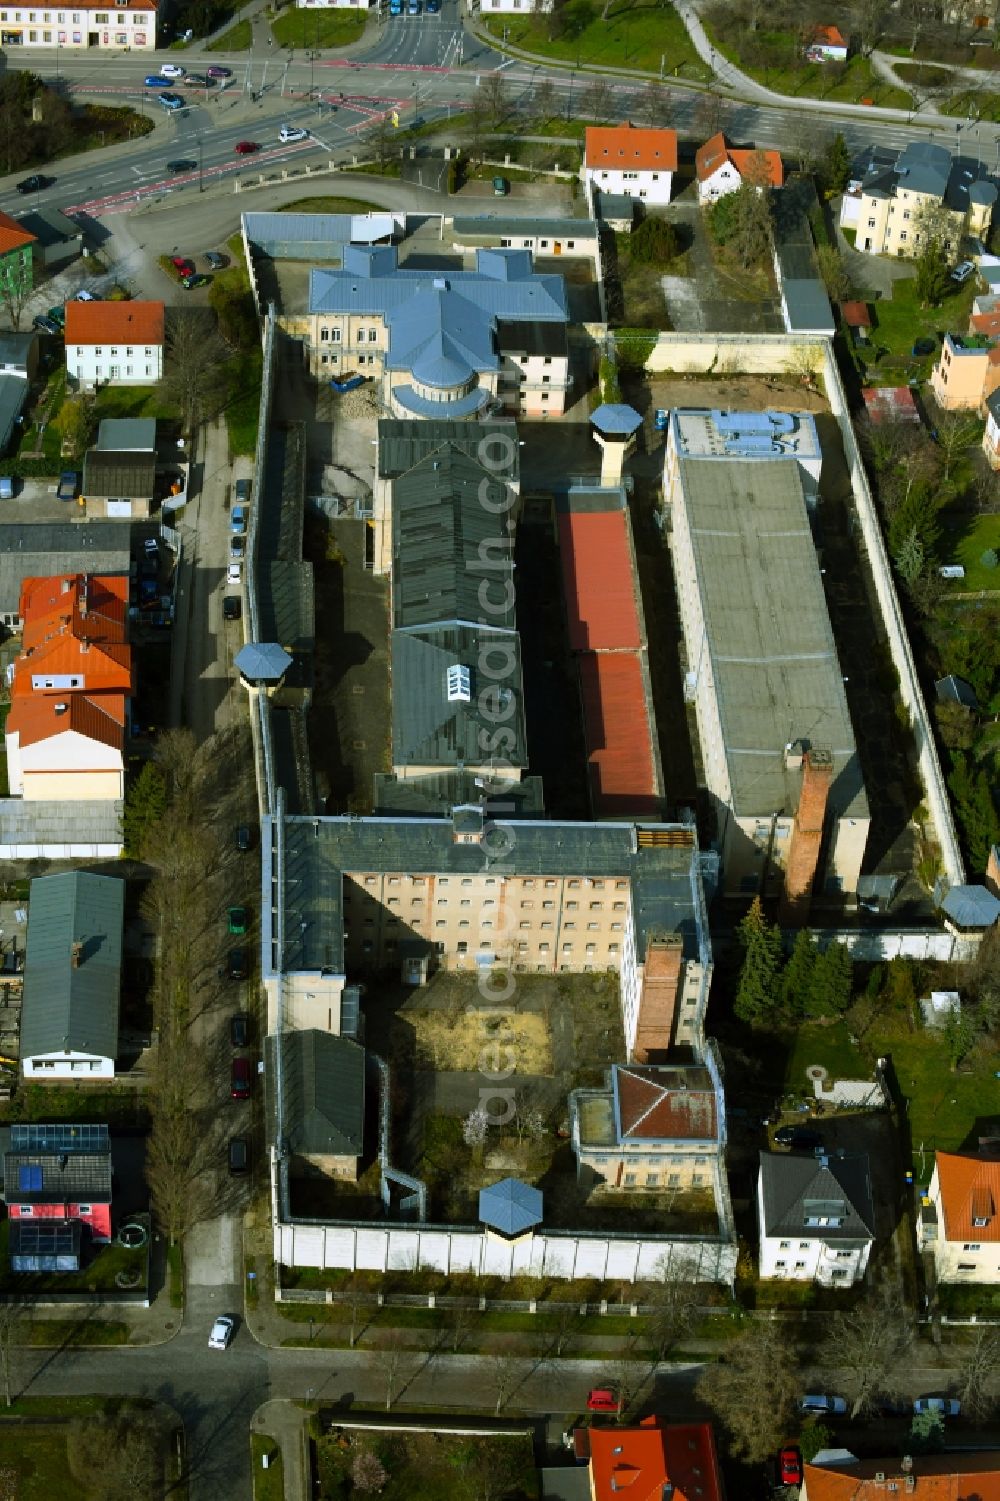 Naumburg (Saale) from above - Former correctional prison facility in Naumburg (Saale) in the state Saxony-Anhalt, Germany